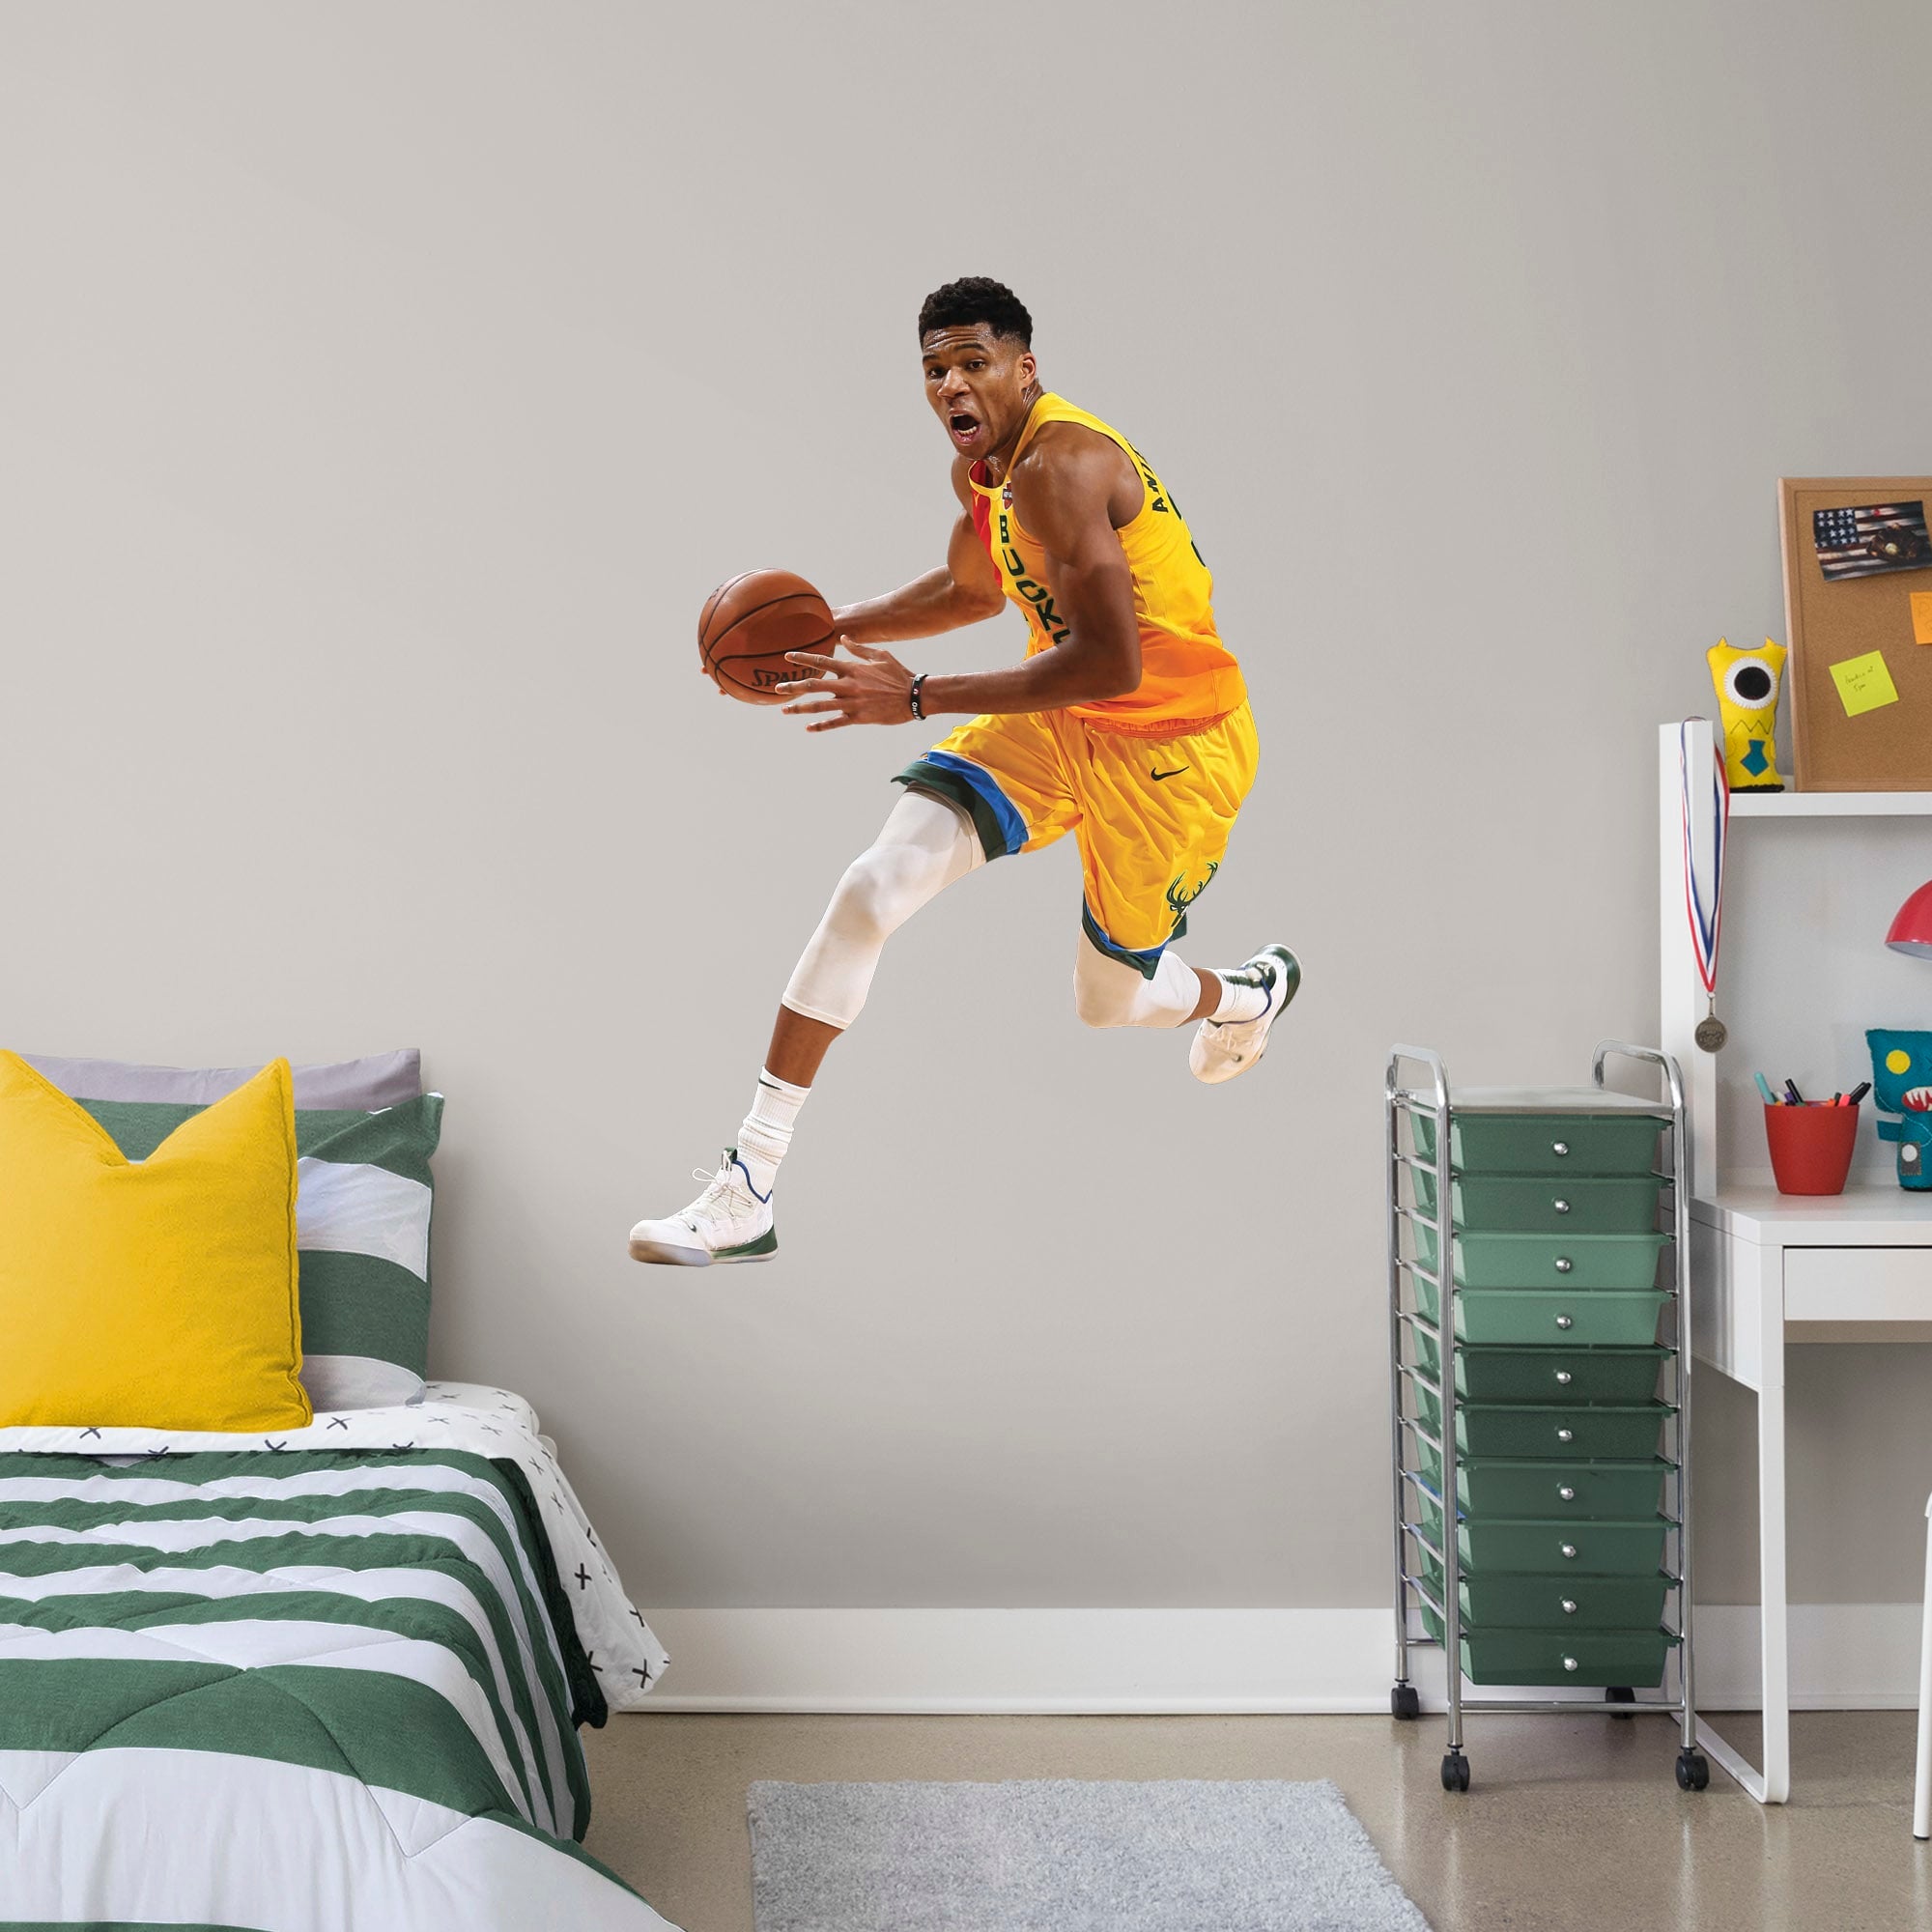 Giannis Antetokounmpo for Milwaukee Bucks: City Jersey - Officially Licensed NBA Removable Wall Decal Giant Athlete + 2 Decals (